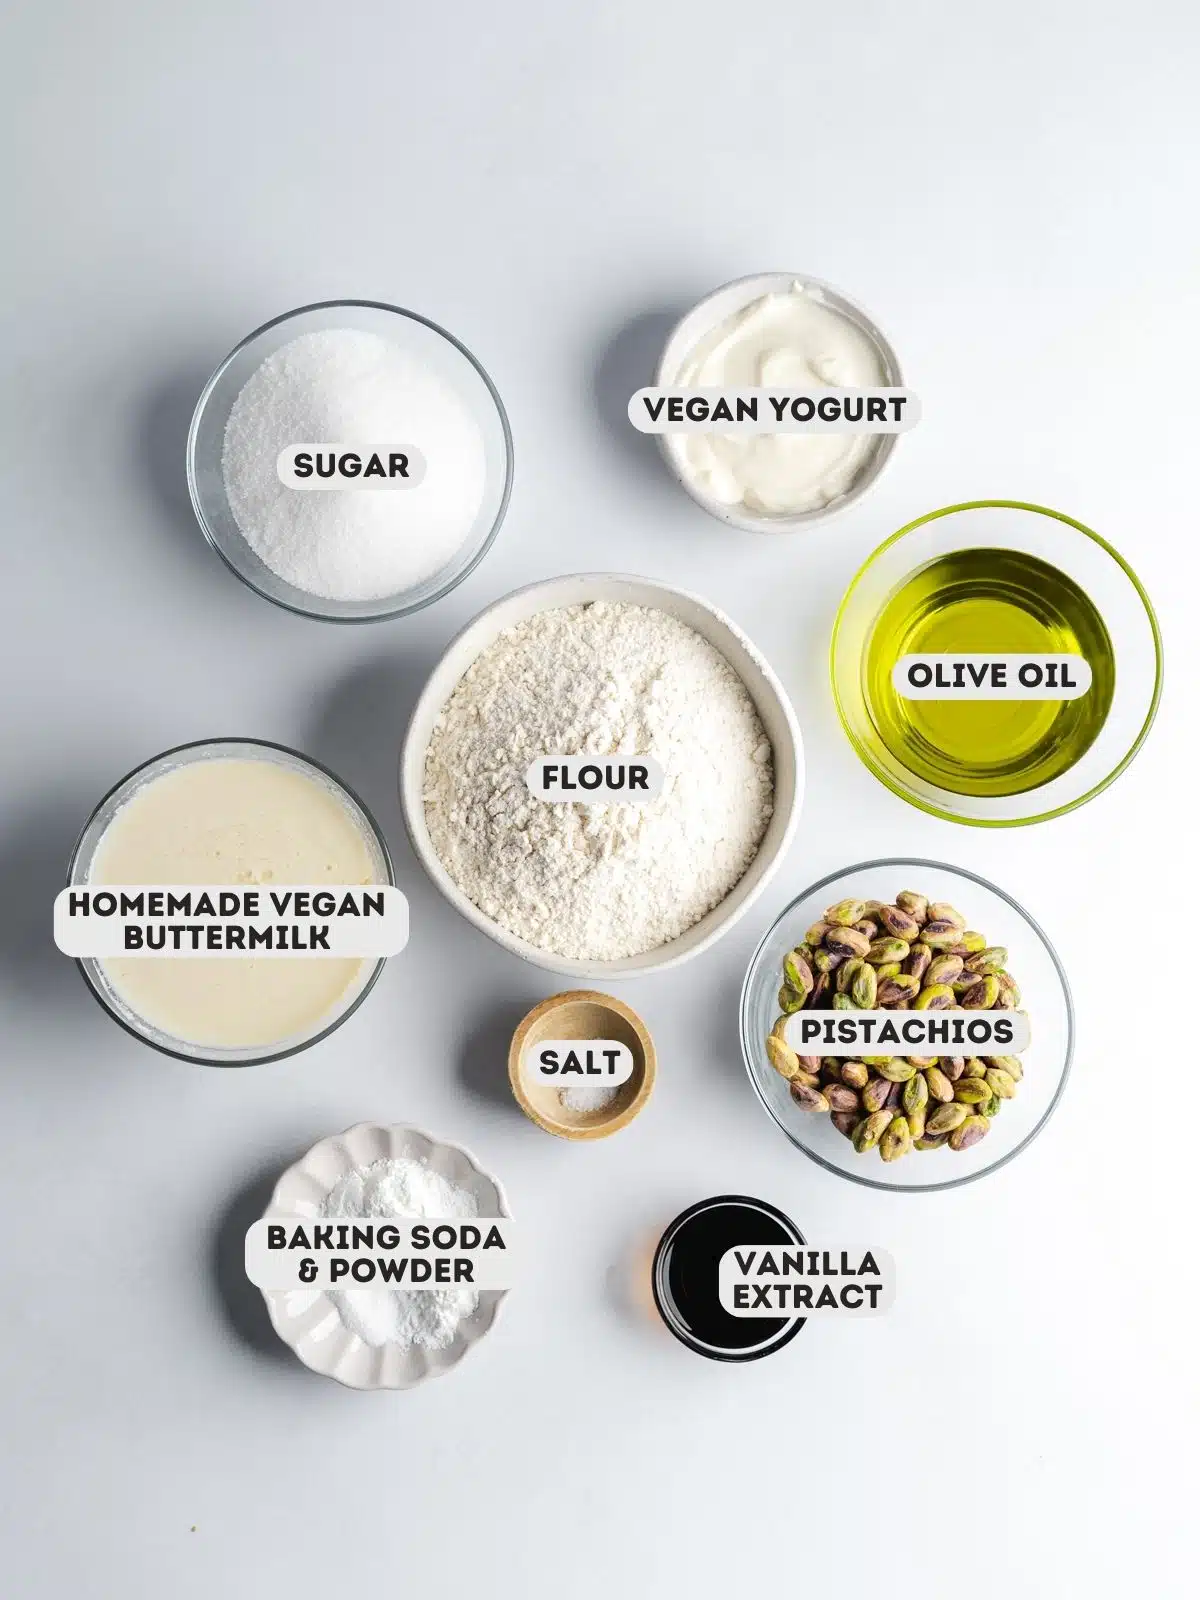 ingredients to make pistachio muffins measured in clear bowls on a gray surface with text overlay.